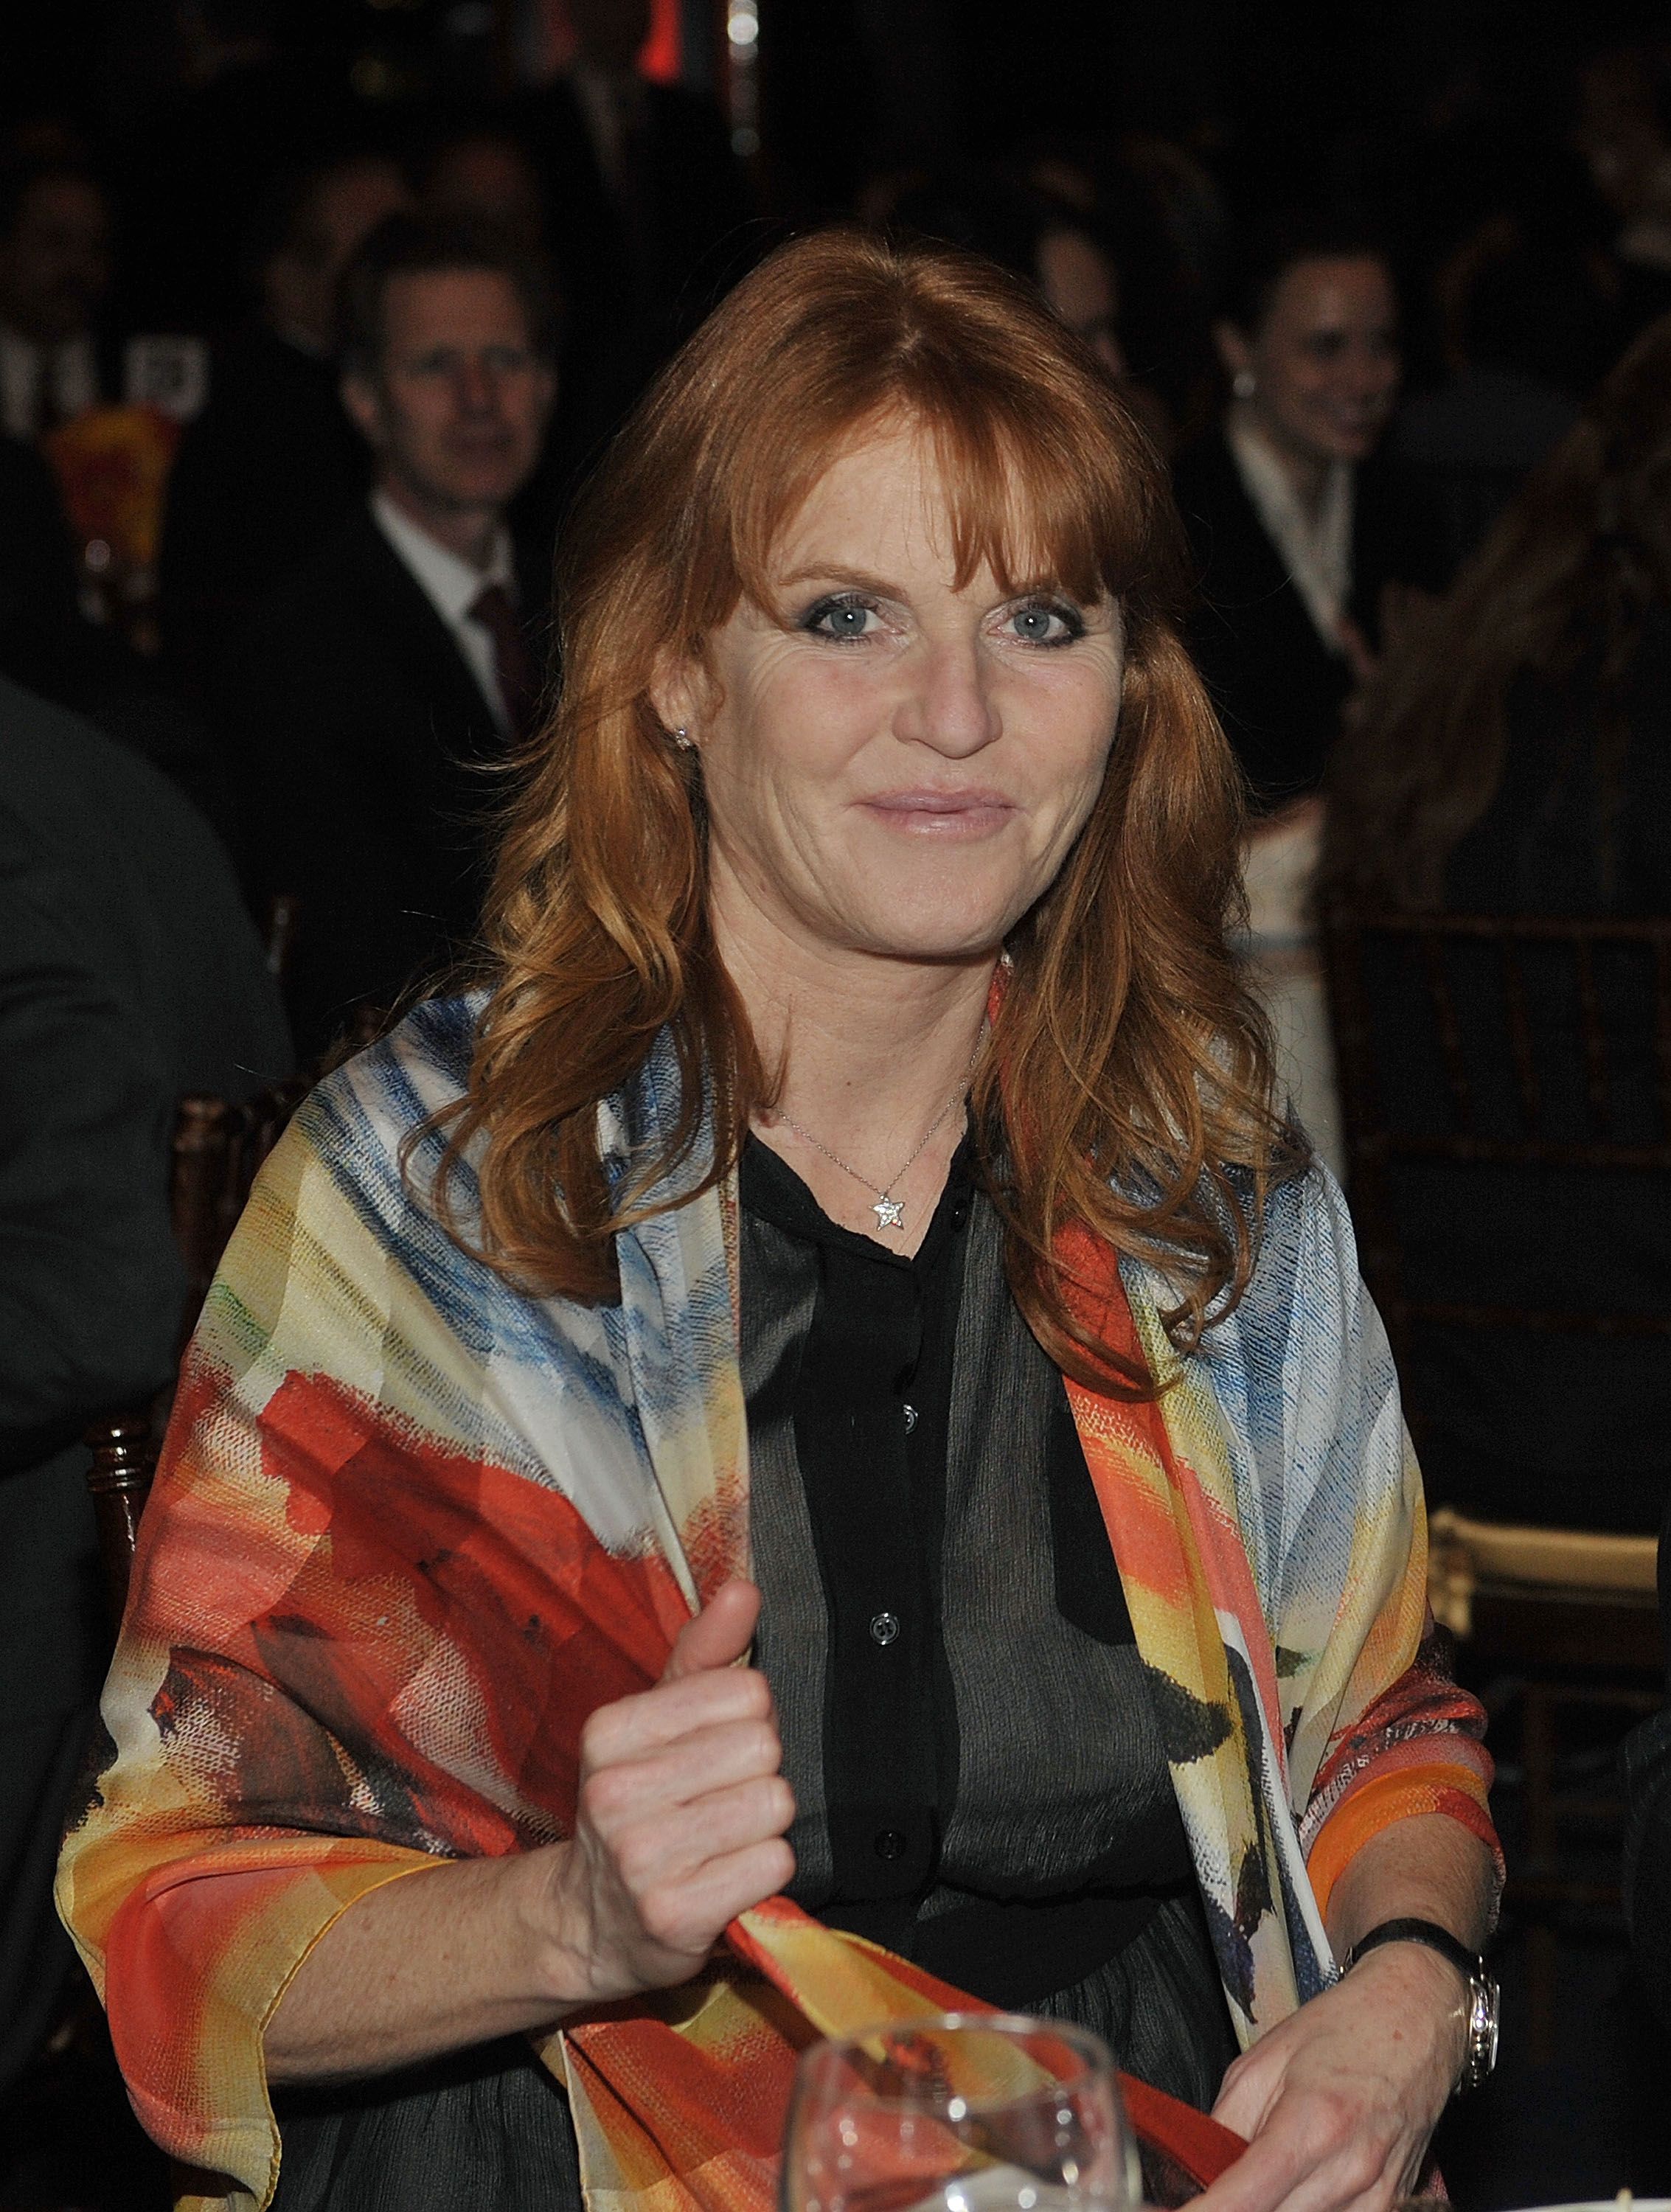 Sarah Ferguson at the Miracle Corners of the World Annual Gala dinner celebration on April 13, 2010 | Photo: Getty Images